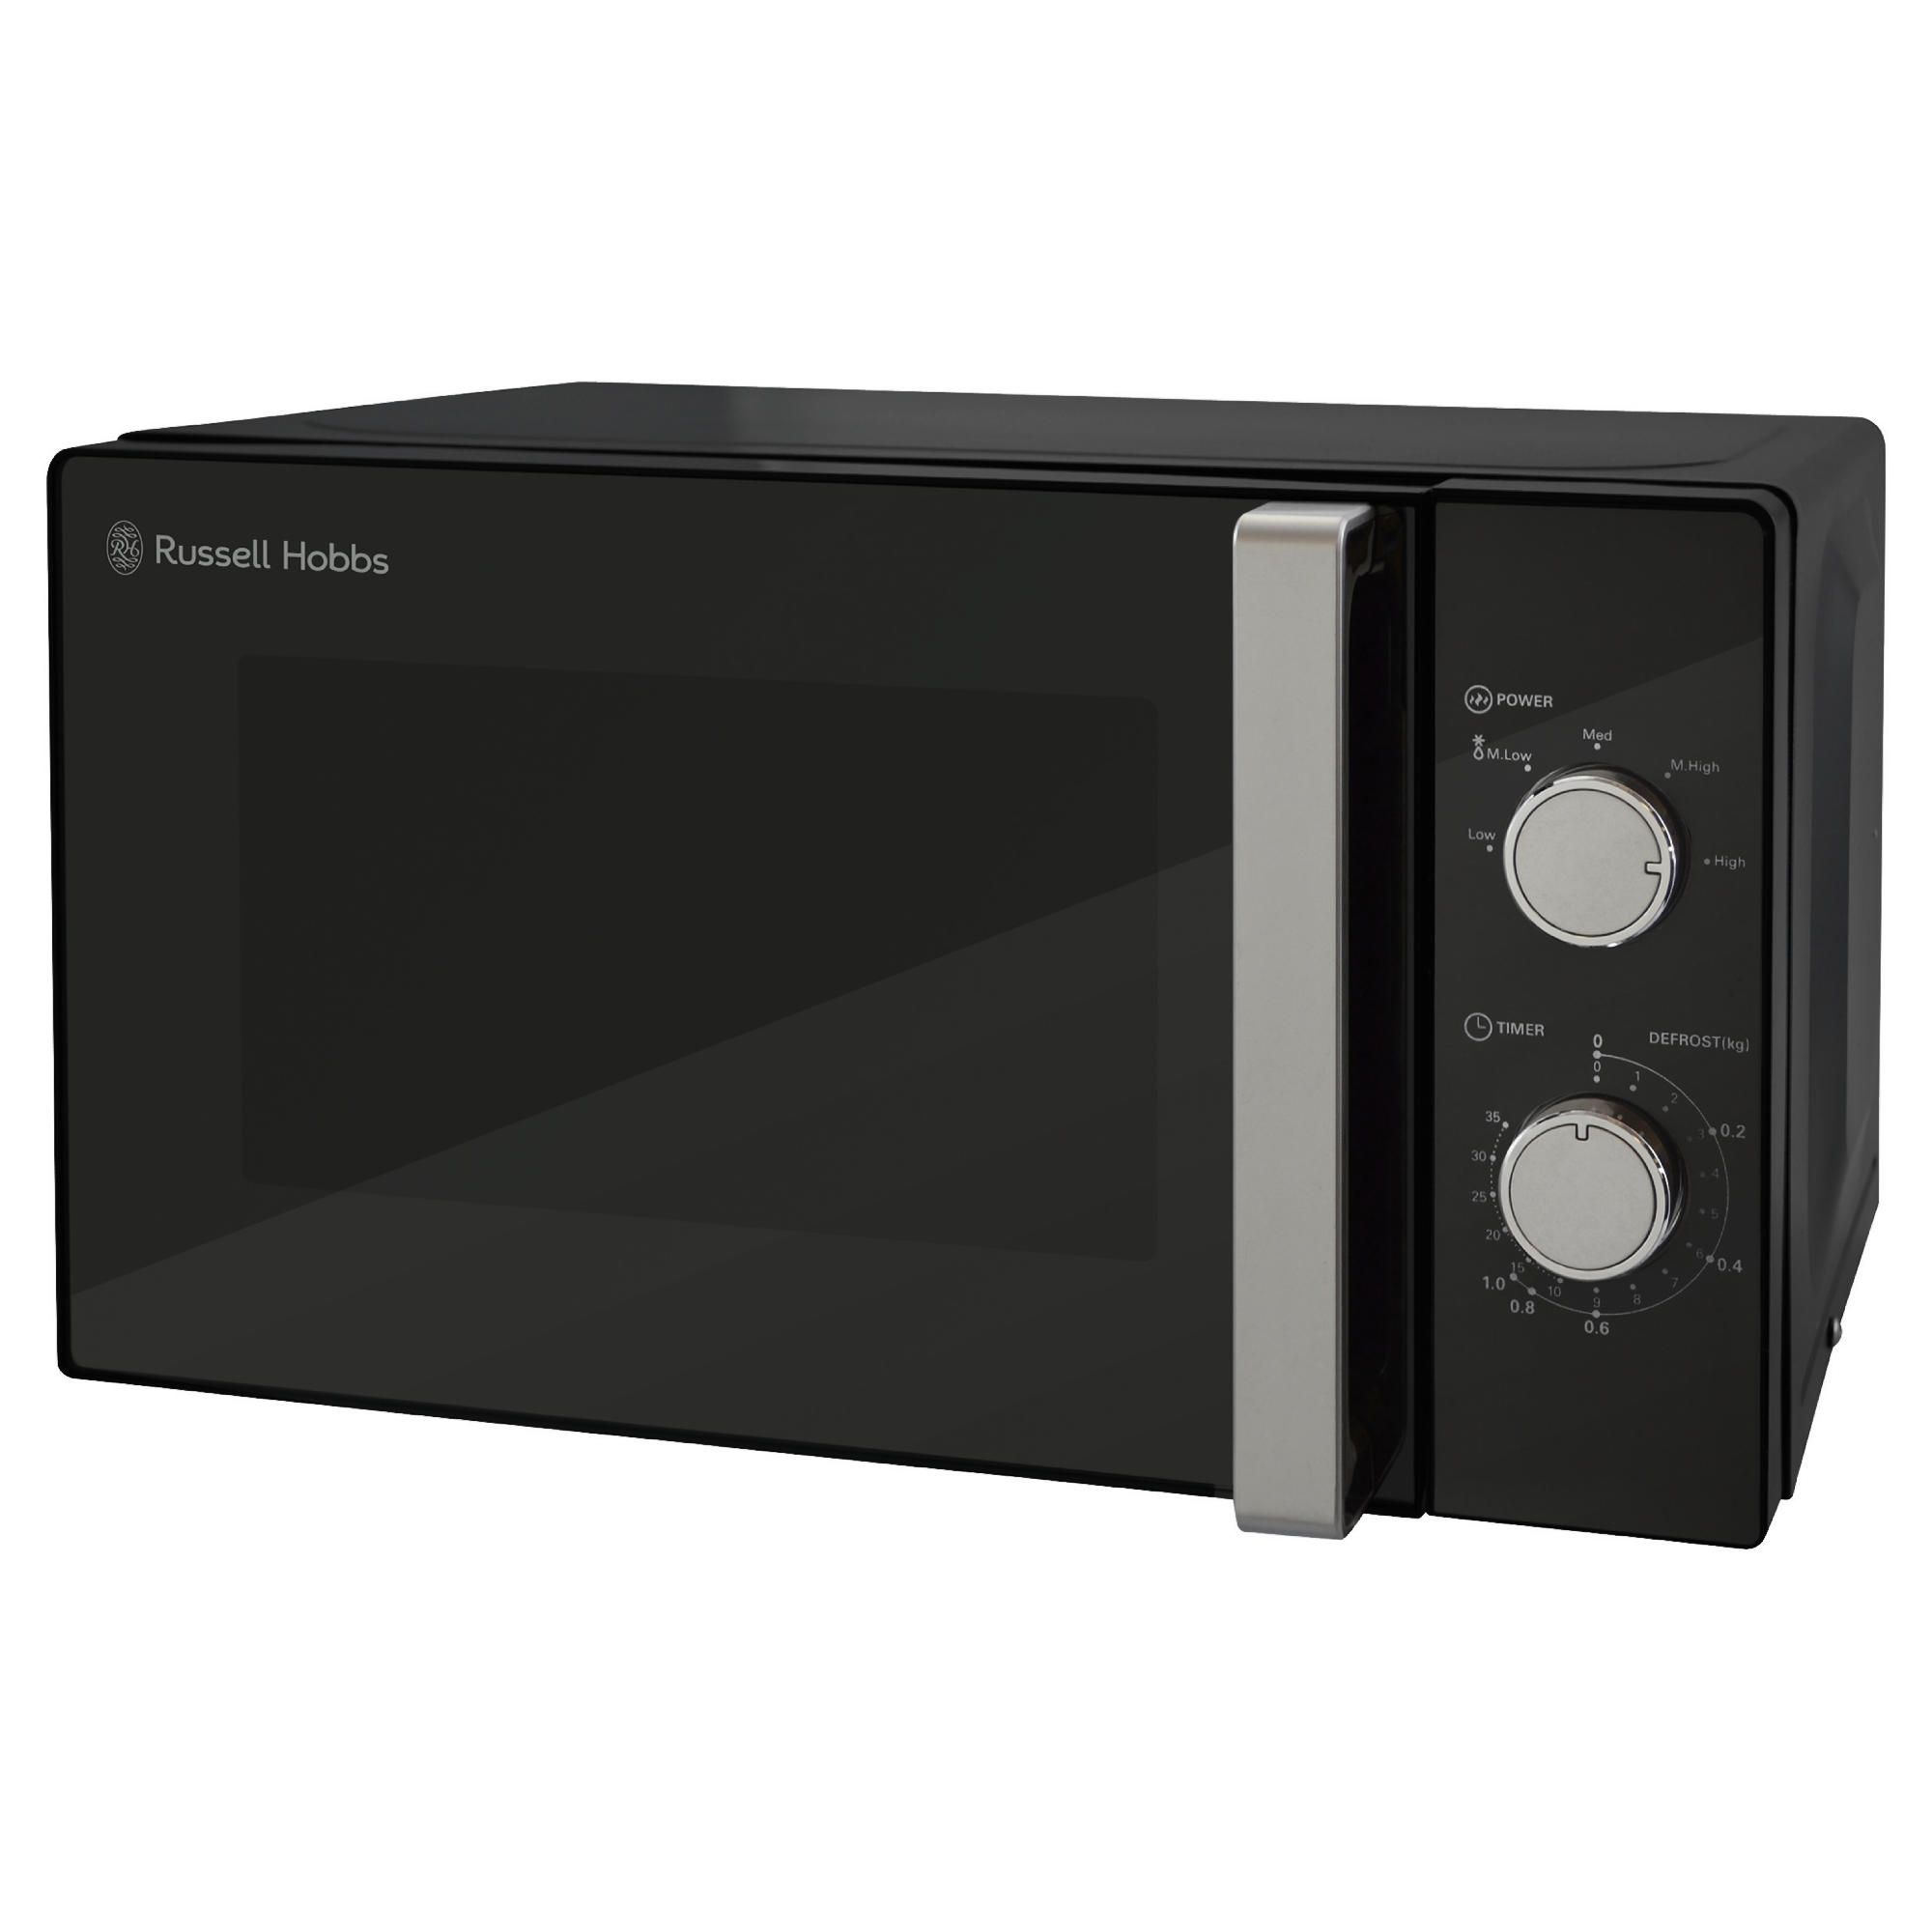 Tesco Direct - Russell Hobbs RHM2061B 20L Manual Microwave - Black - Special Savings Today at 